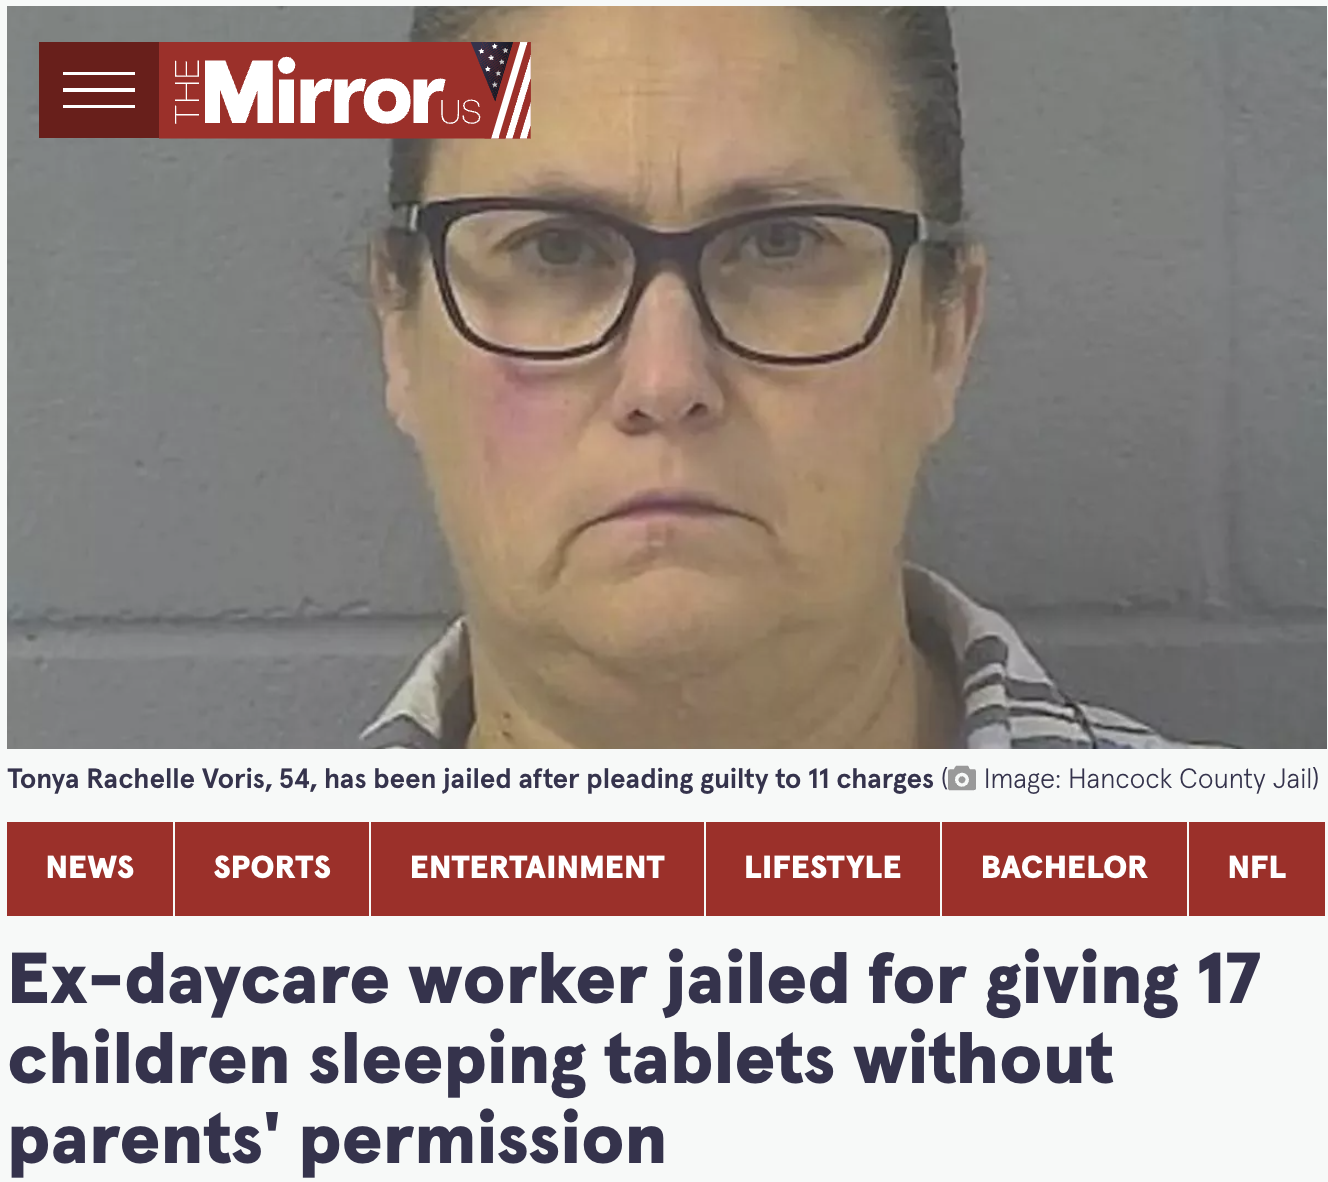 photo caption - Mirrors Tonya Rachelle Voris, 54, has been jailed after pleading guilty to 11 charges Image Hancock County Jail News Sports Entertainment Lifestyle Bachelor Nfl Exdaycare worker jailed for giving 17 children sleeping tablets without parent